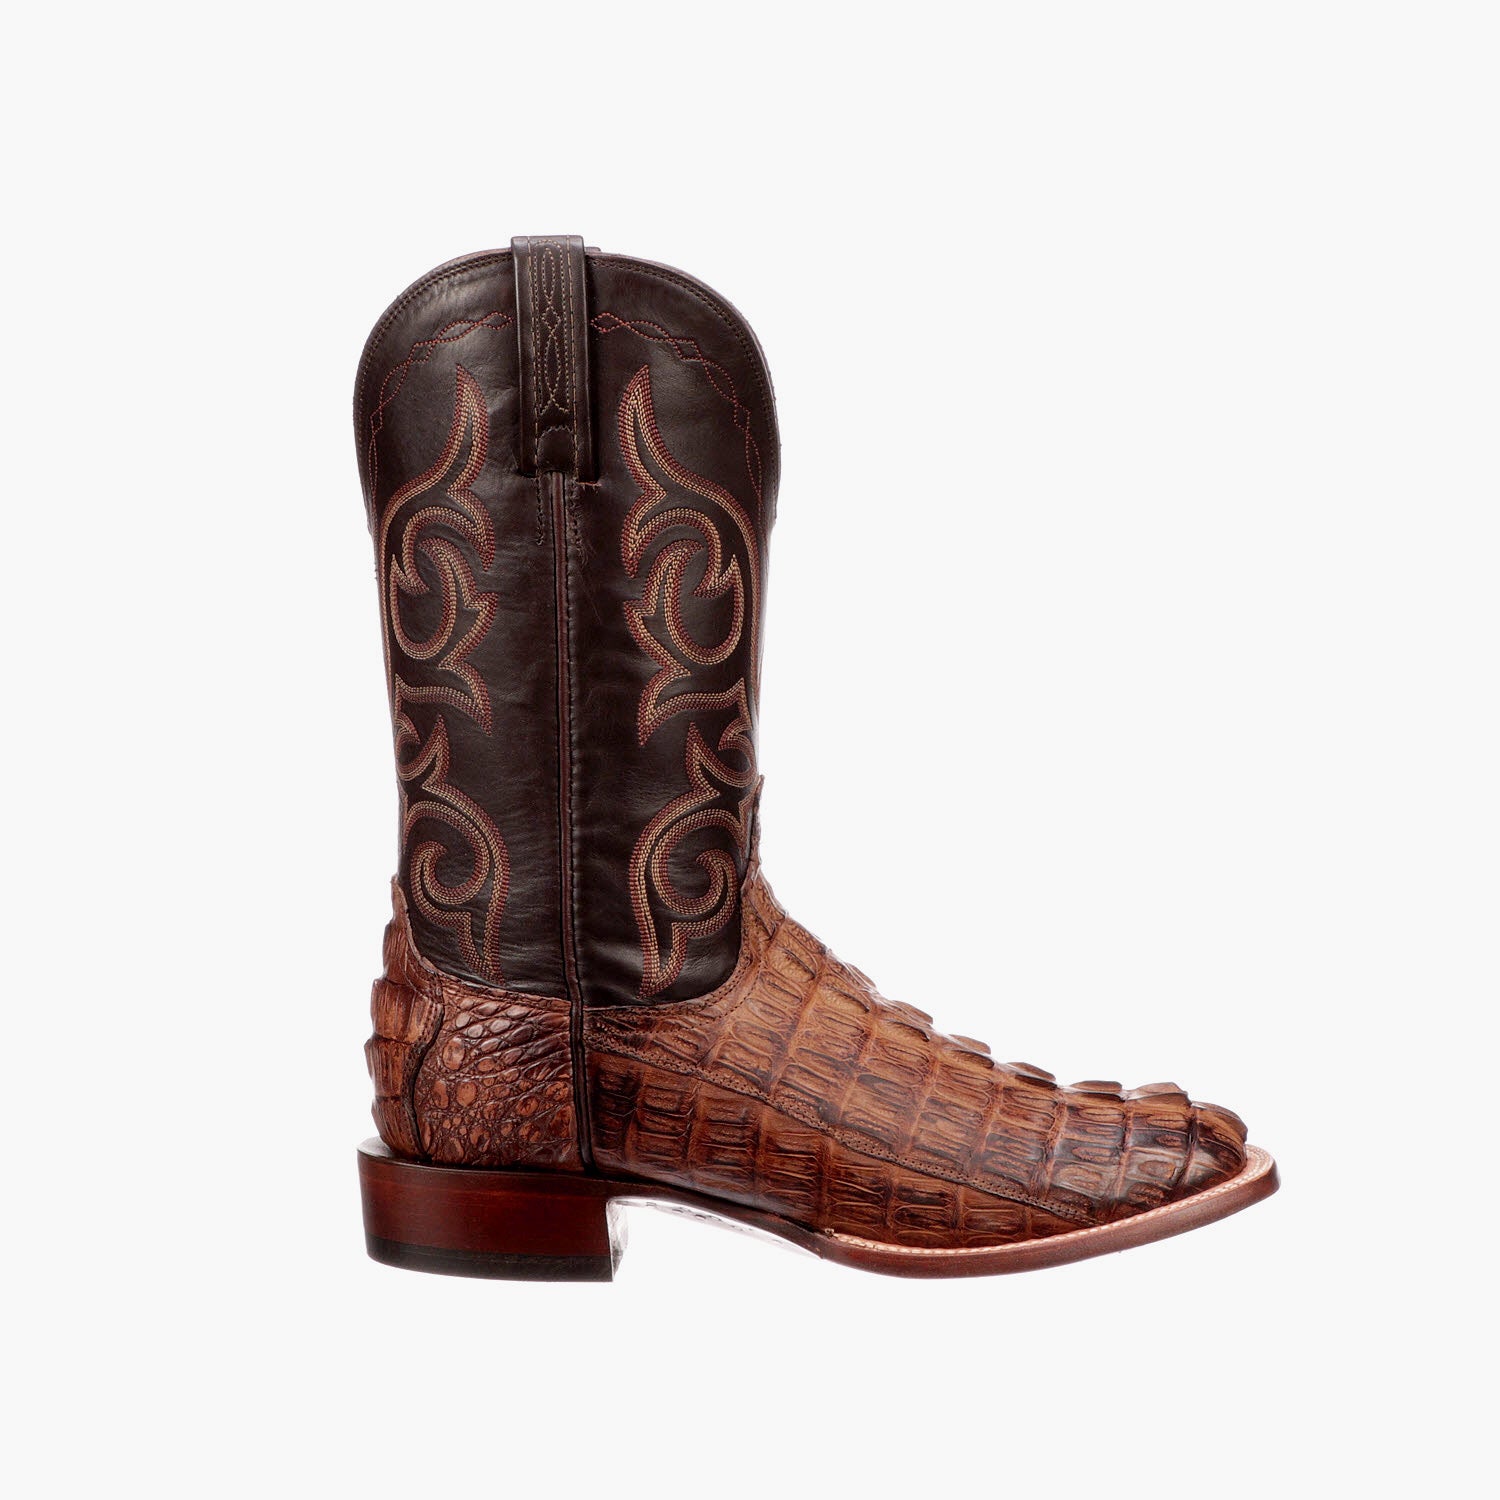 Future of Lucchese Boots